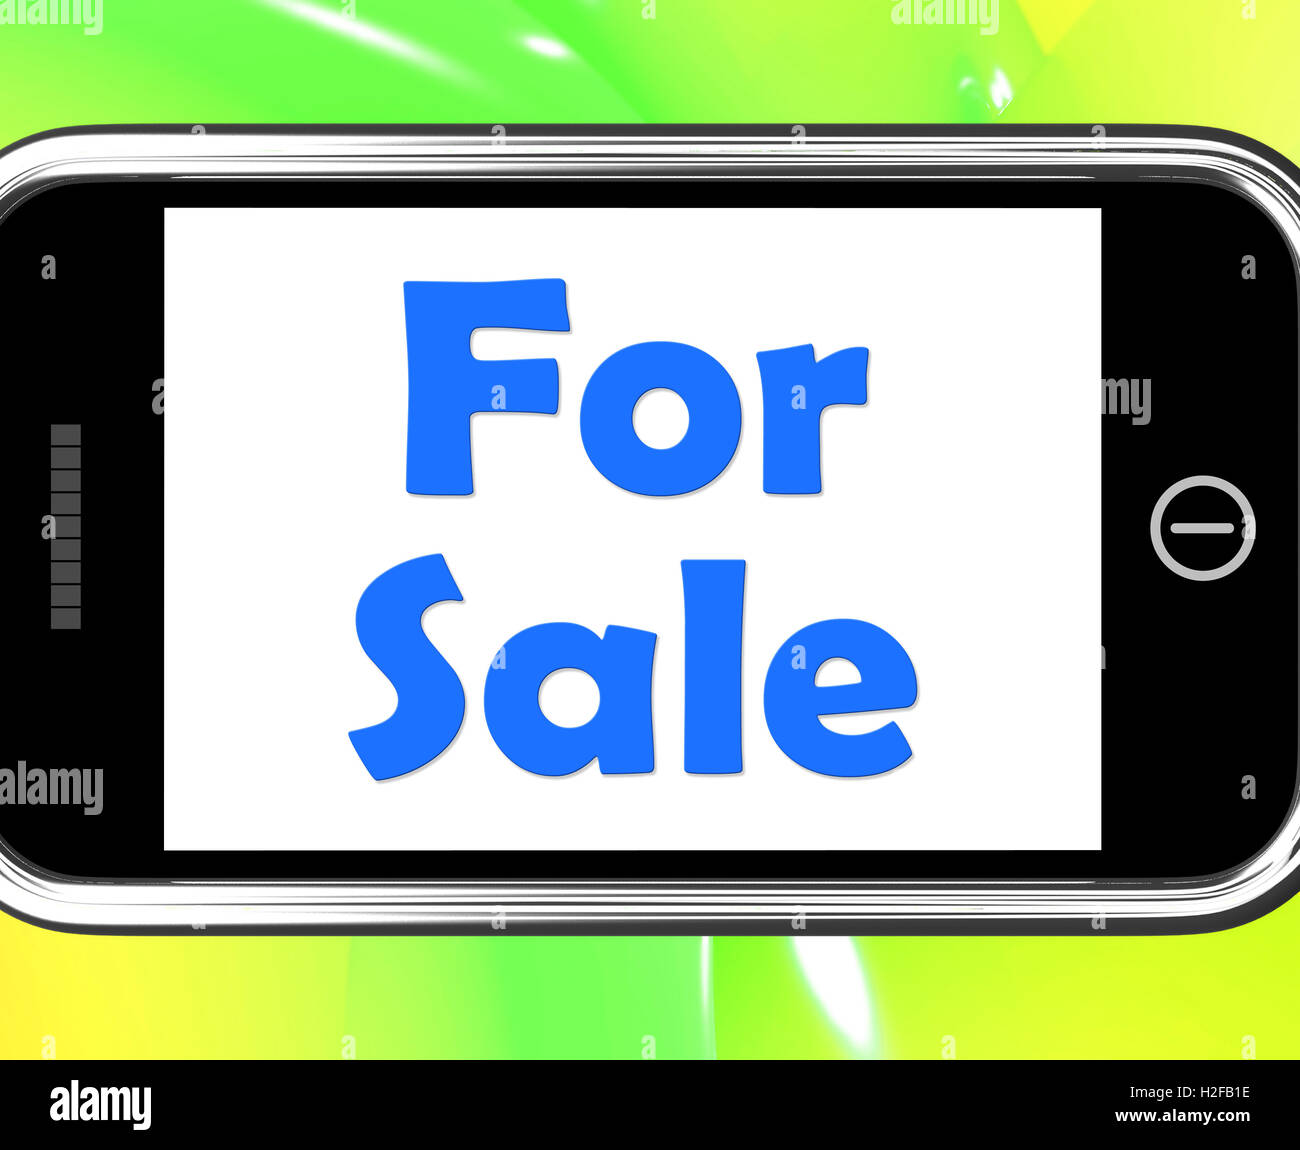 For Sale On Phone Means Purchasable Available To Buy Or On Offer Stock Photo